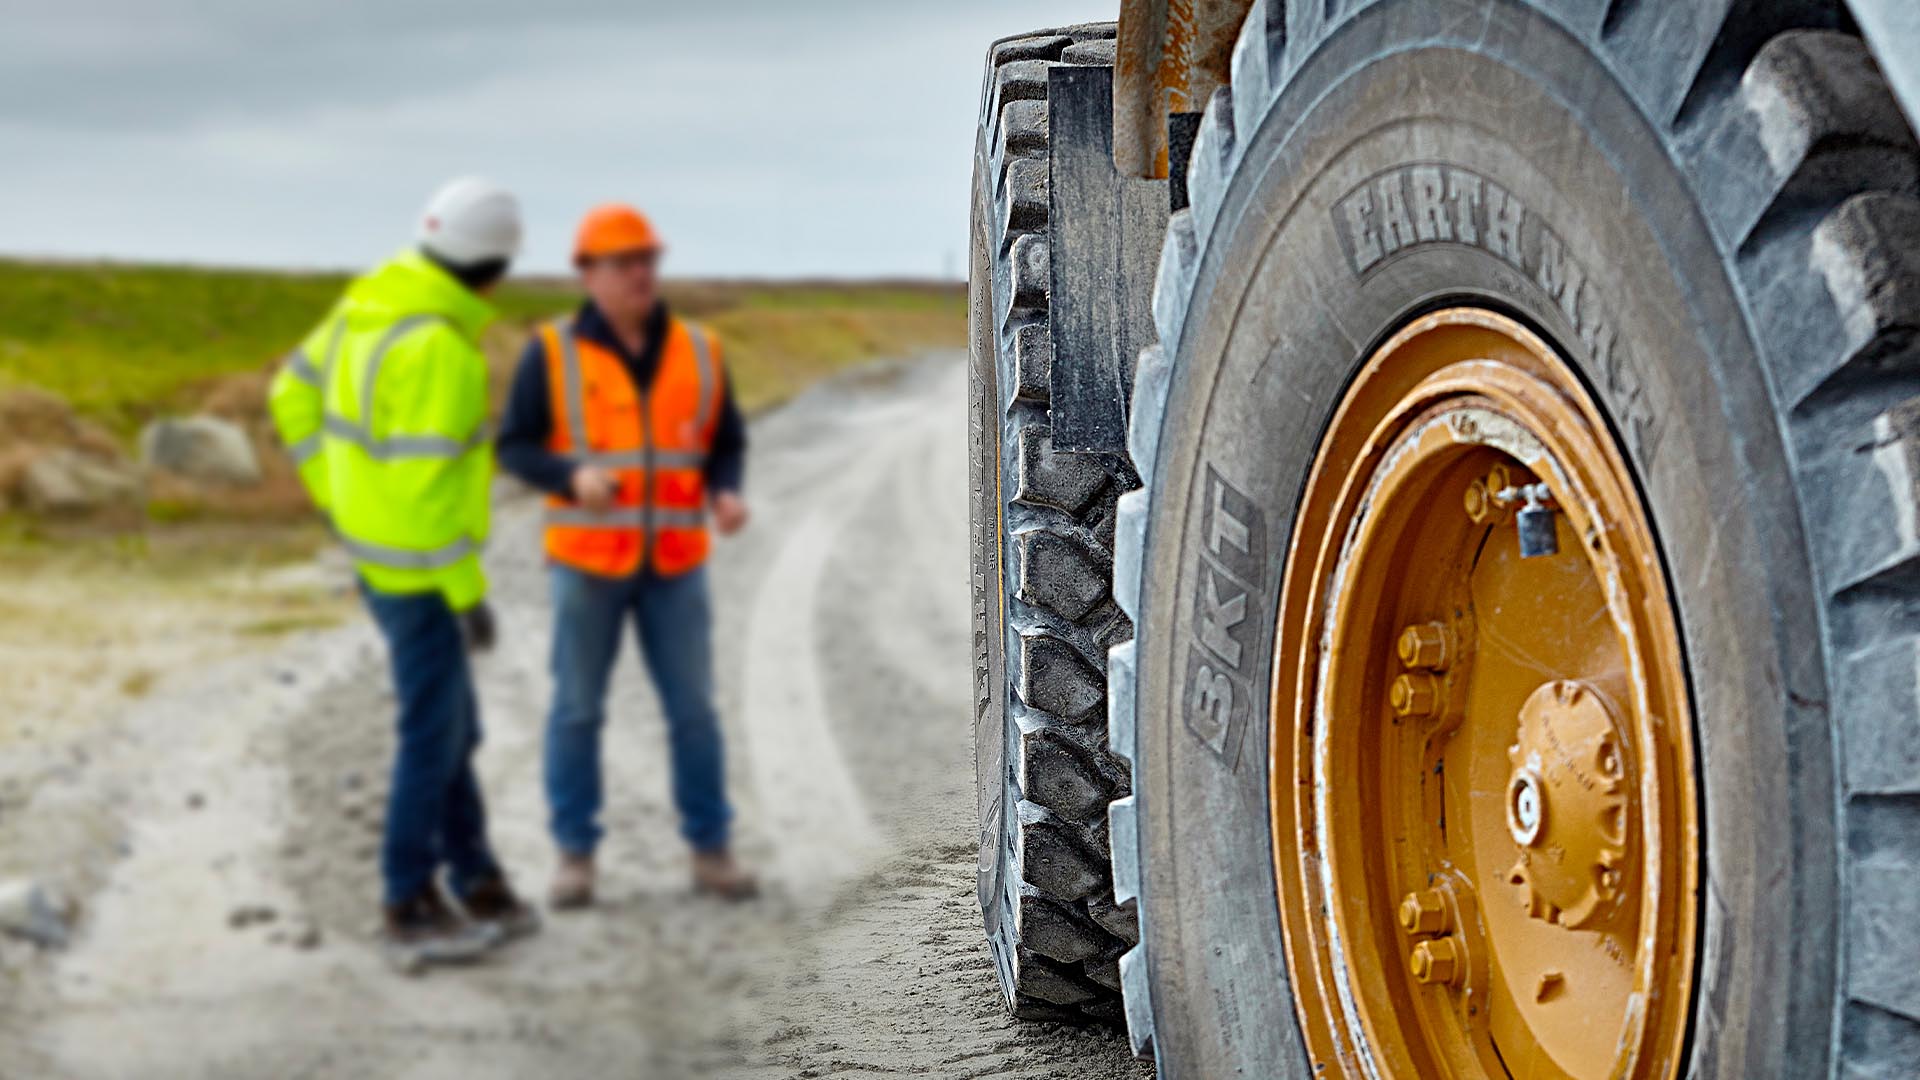 Choosing a tire is not an easy job! No need to worry – BKT experts are here for you!